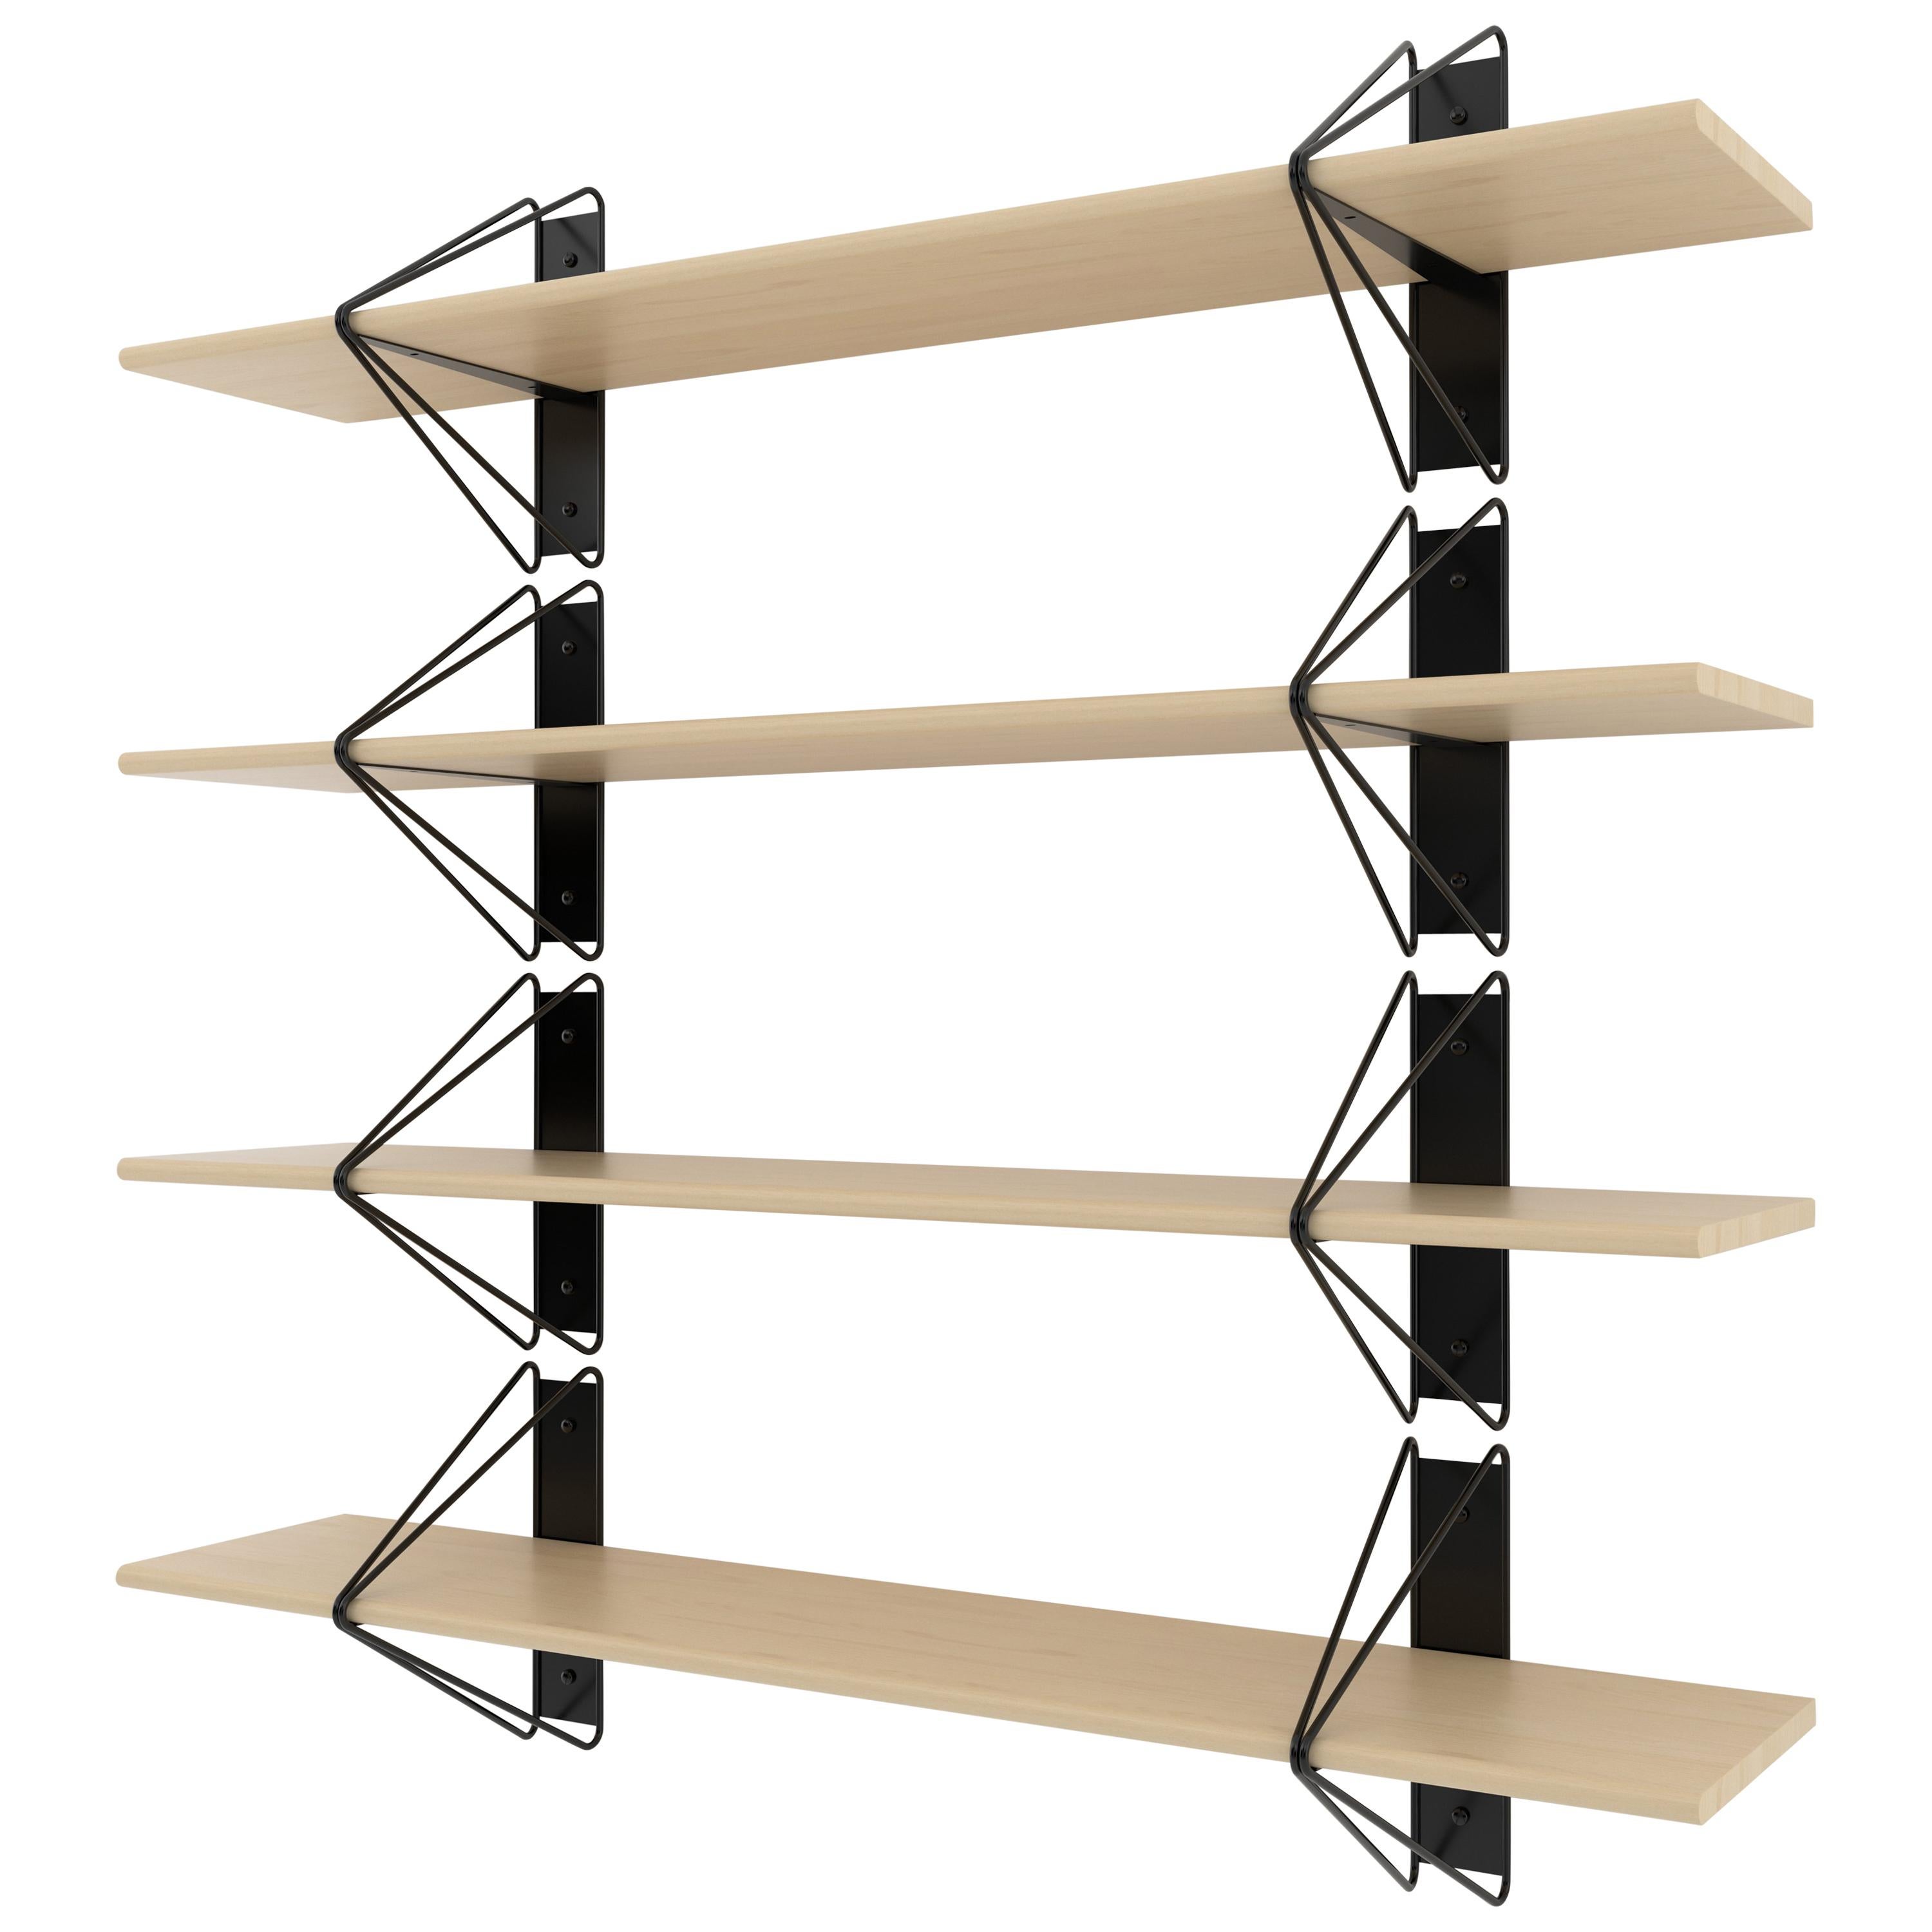 American Set of 2 Strut Shelves from Souda, White and Maple, Made to Order For Sale